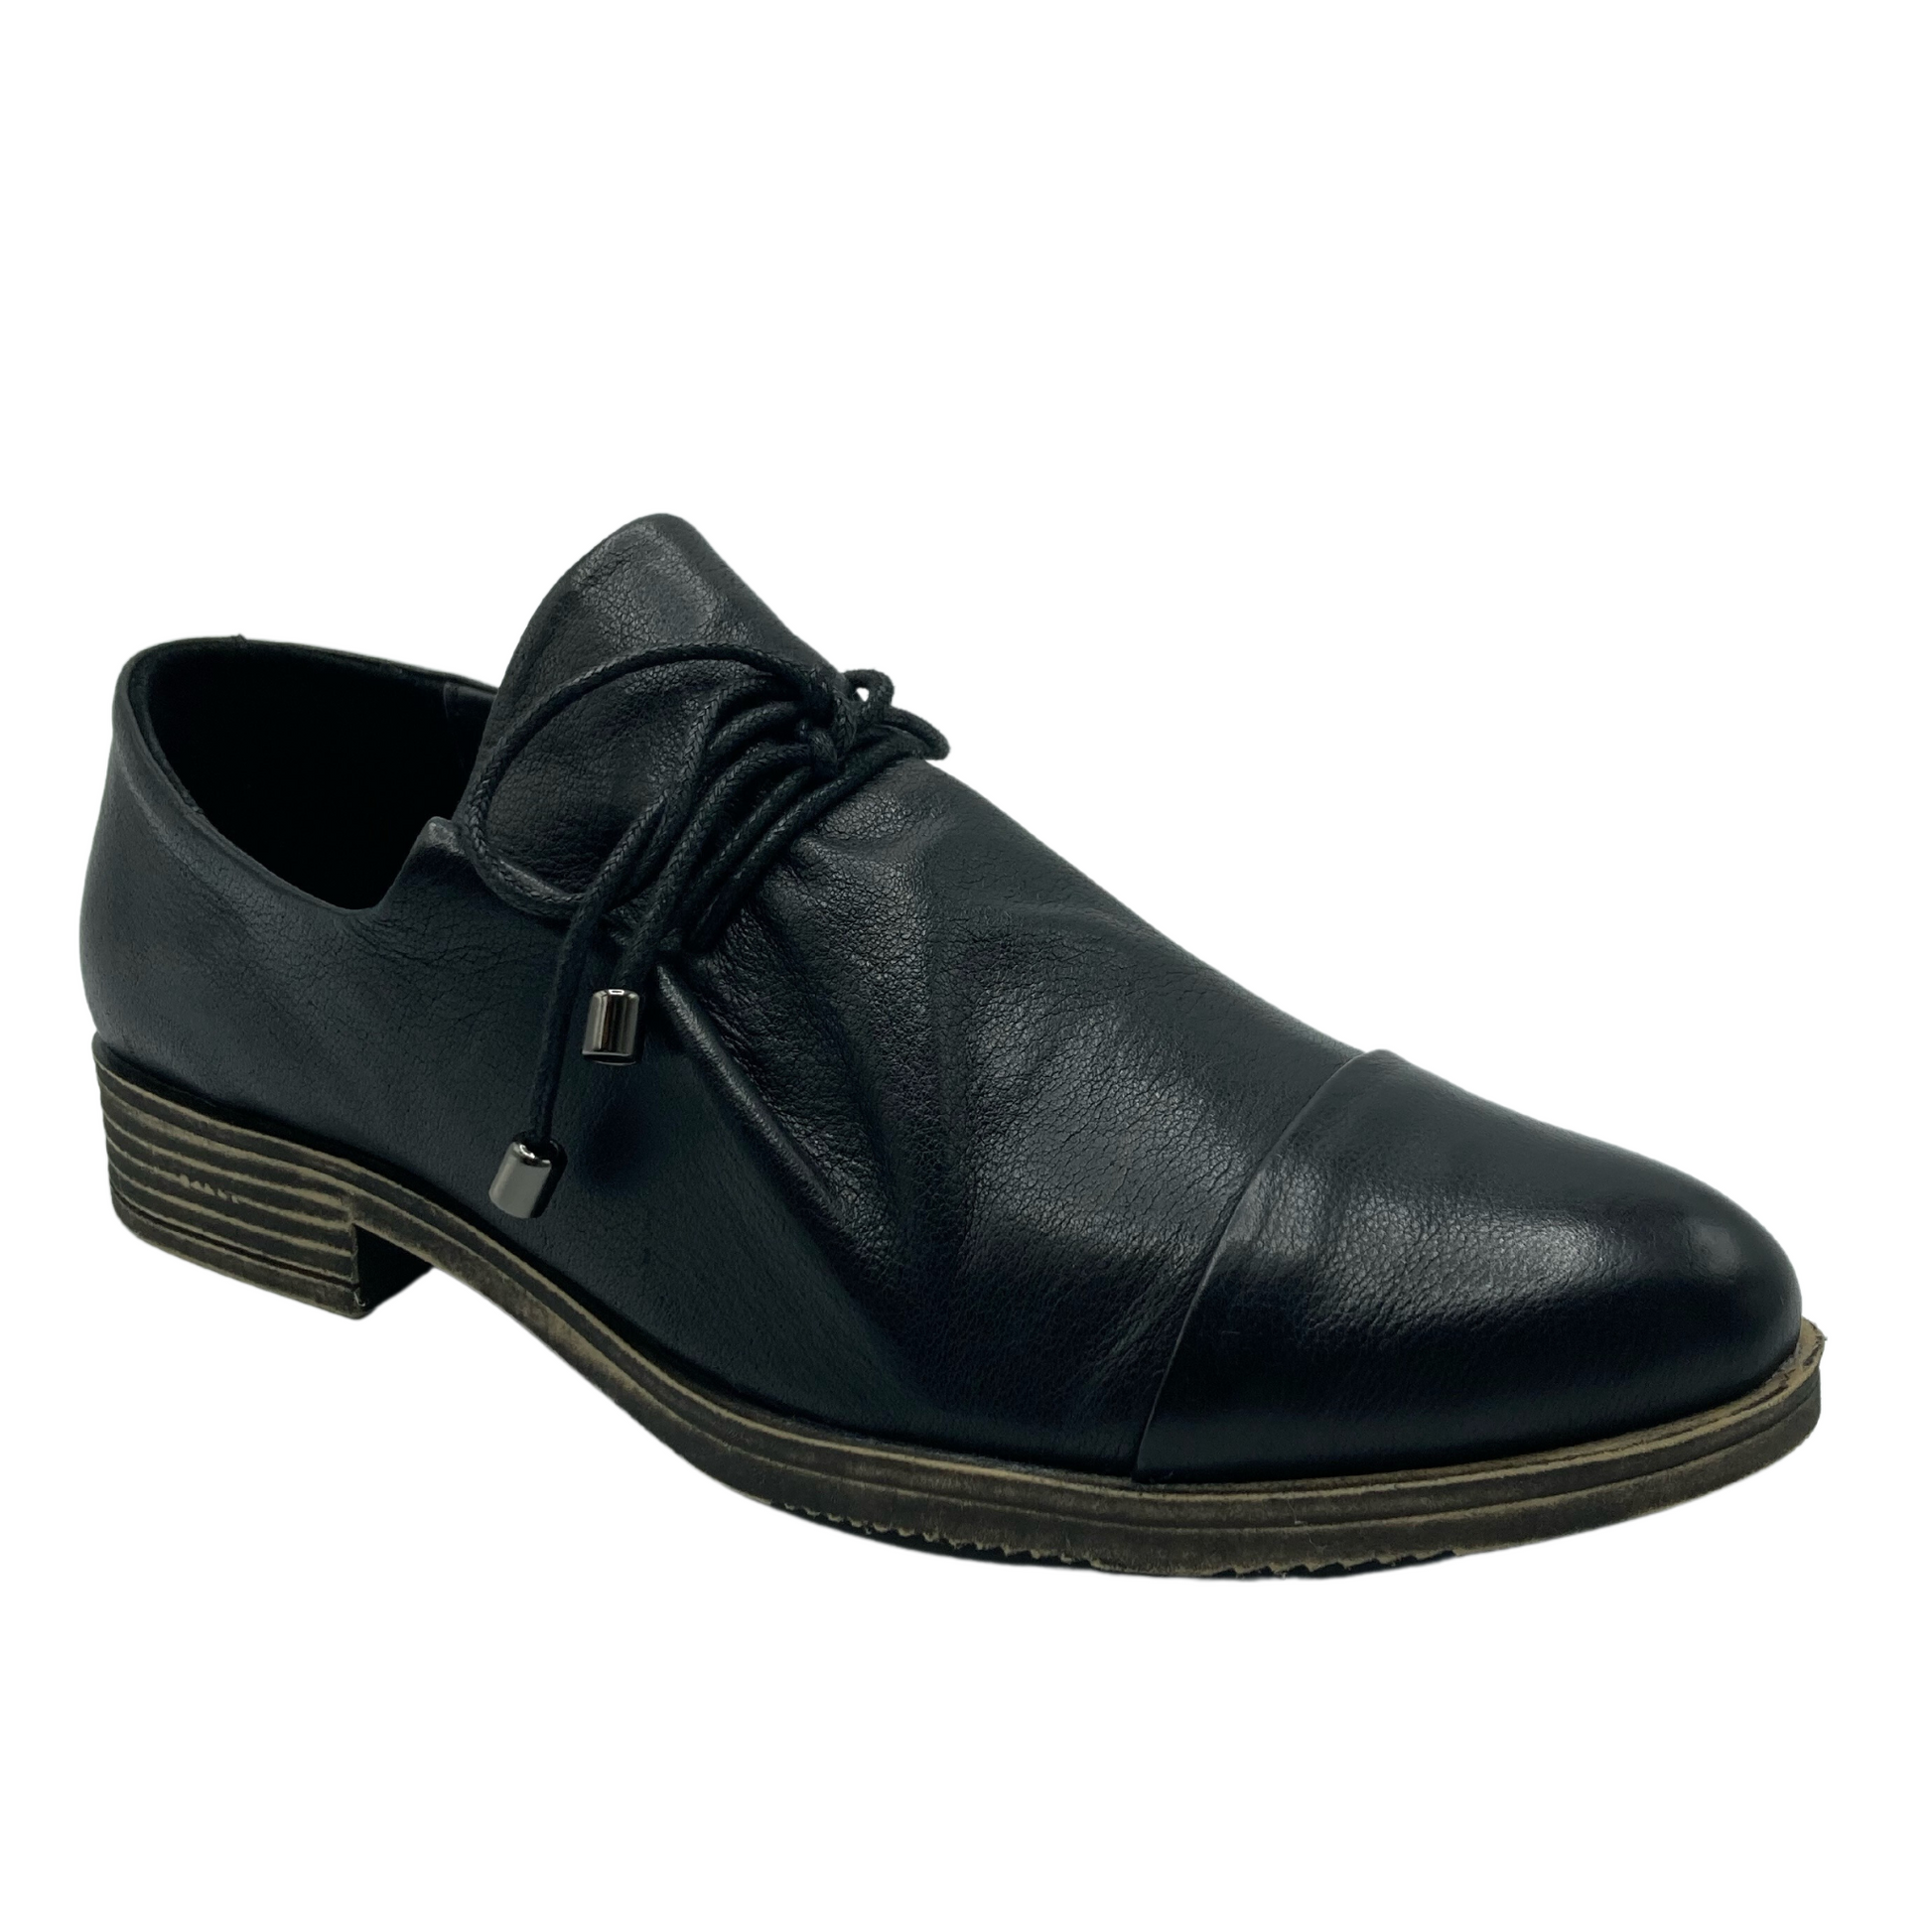 45 degree angled view of black leather shoe with black laces that have silver aglets on the ends